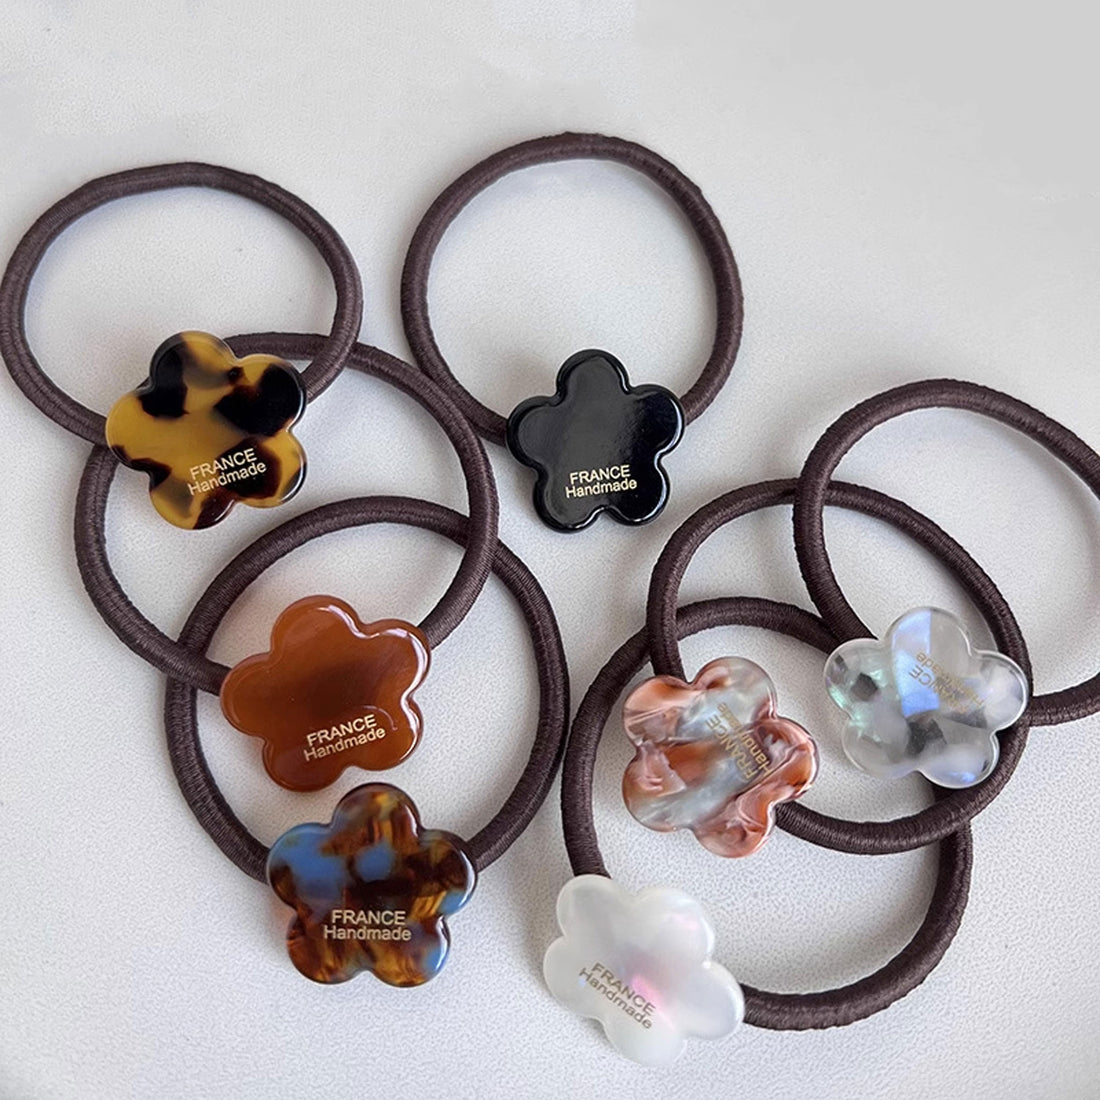 Flower acetate rubber band